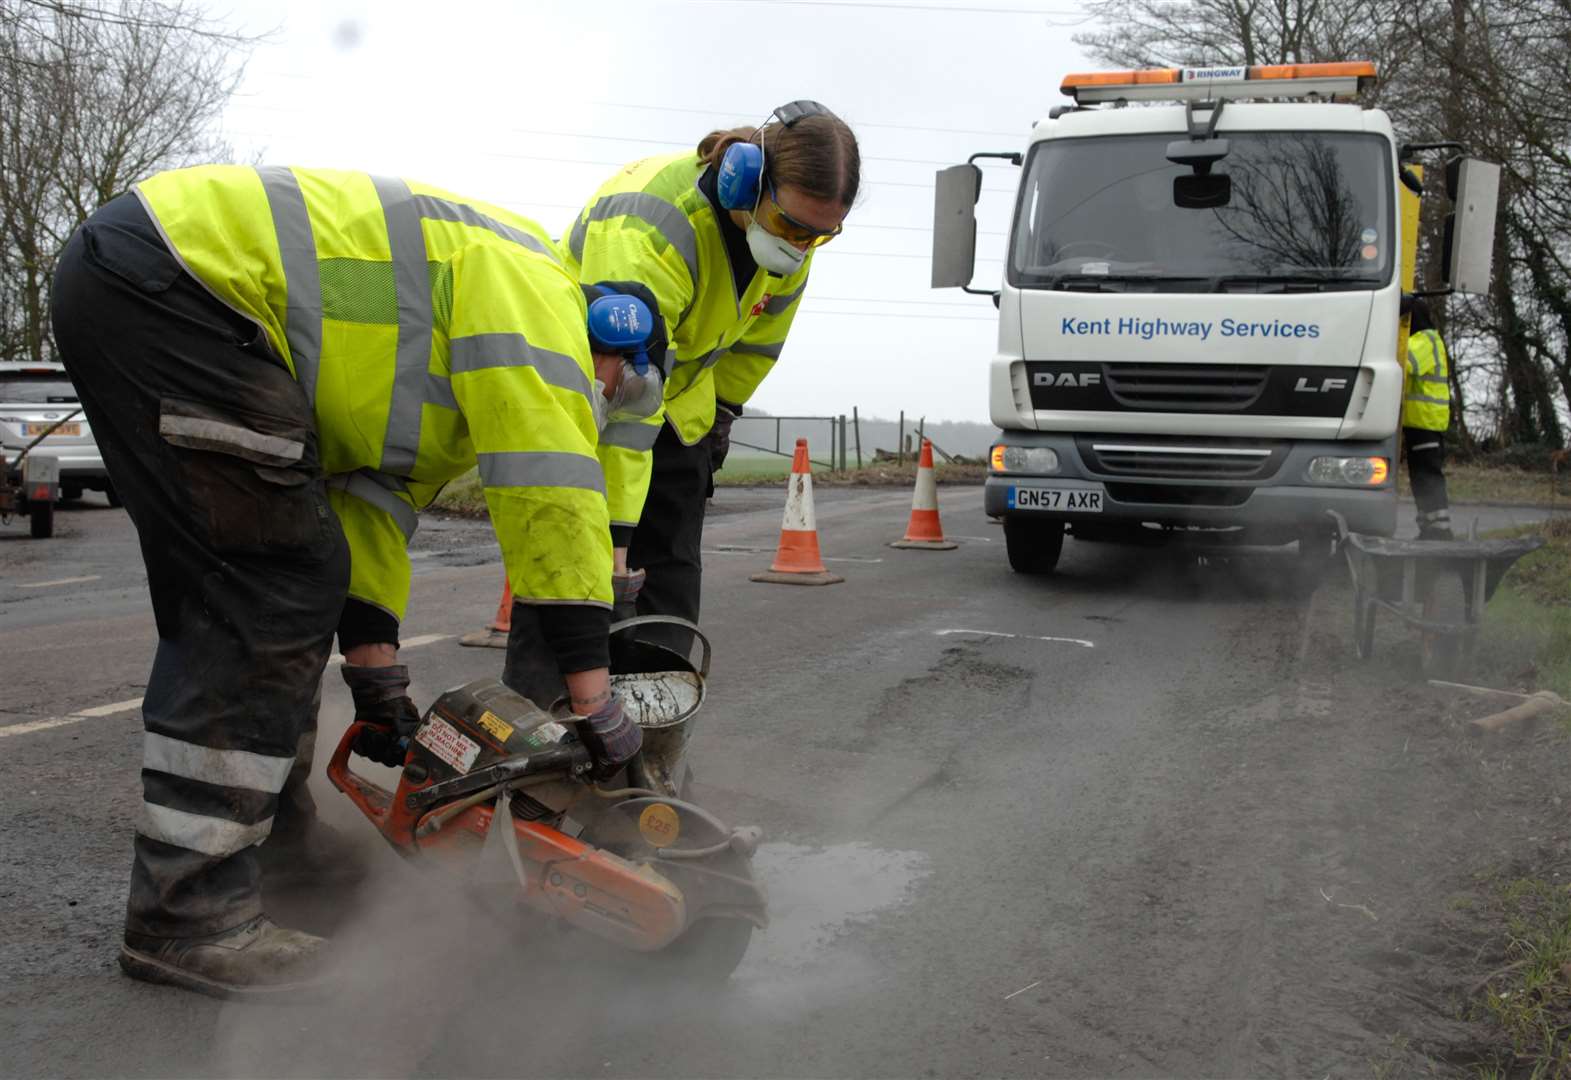 'Demand for pothole repairs has virtually disappeared'